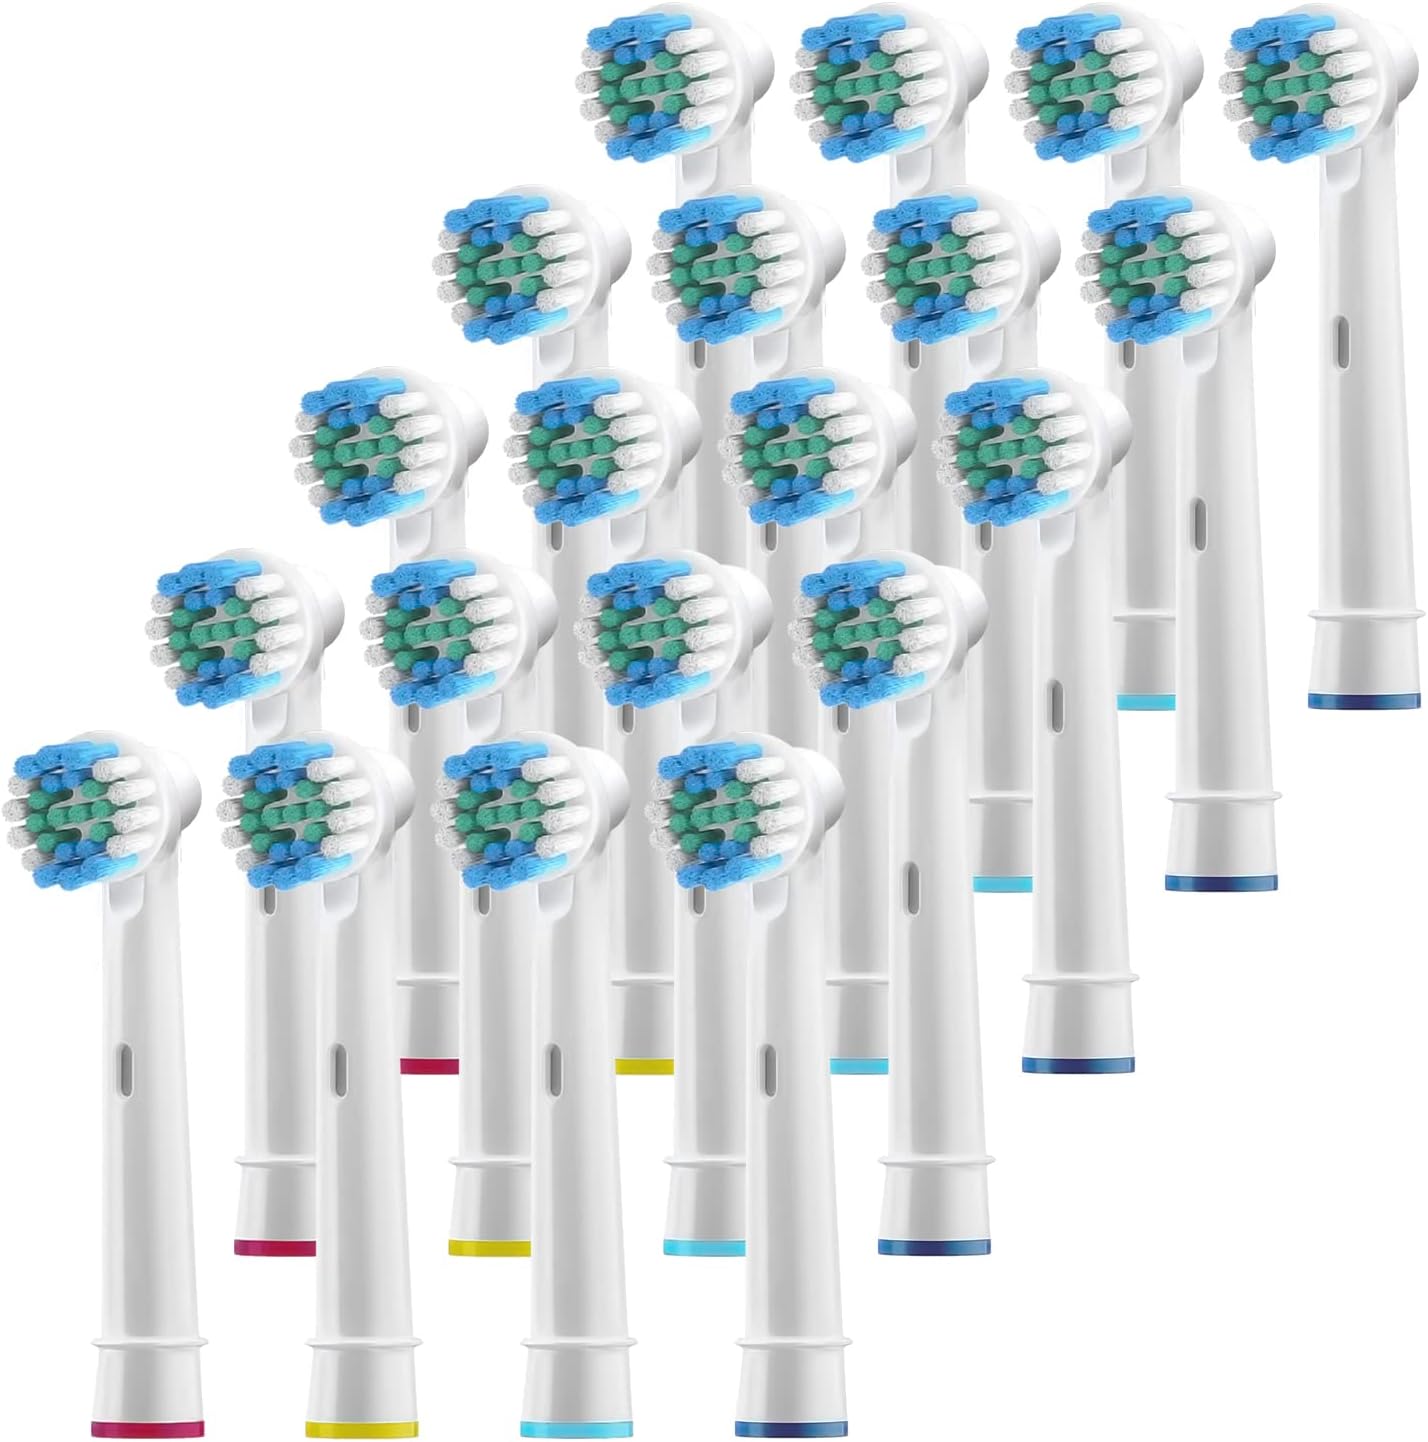 Replacement Toothbrush Heads Compatible Oral B Electric Toothbrush- 20 Precision Brush Heads Fits Braun Pro 1000 1500 Clean 3000 5000 6000 8000 9000 Vitality, Triumph & More - image 1 of 8